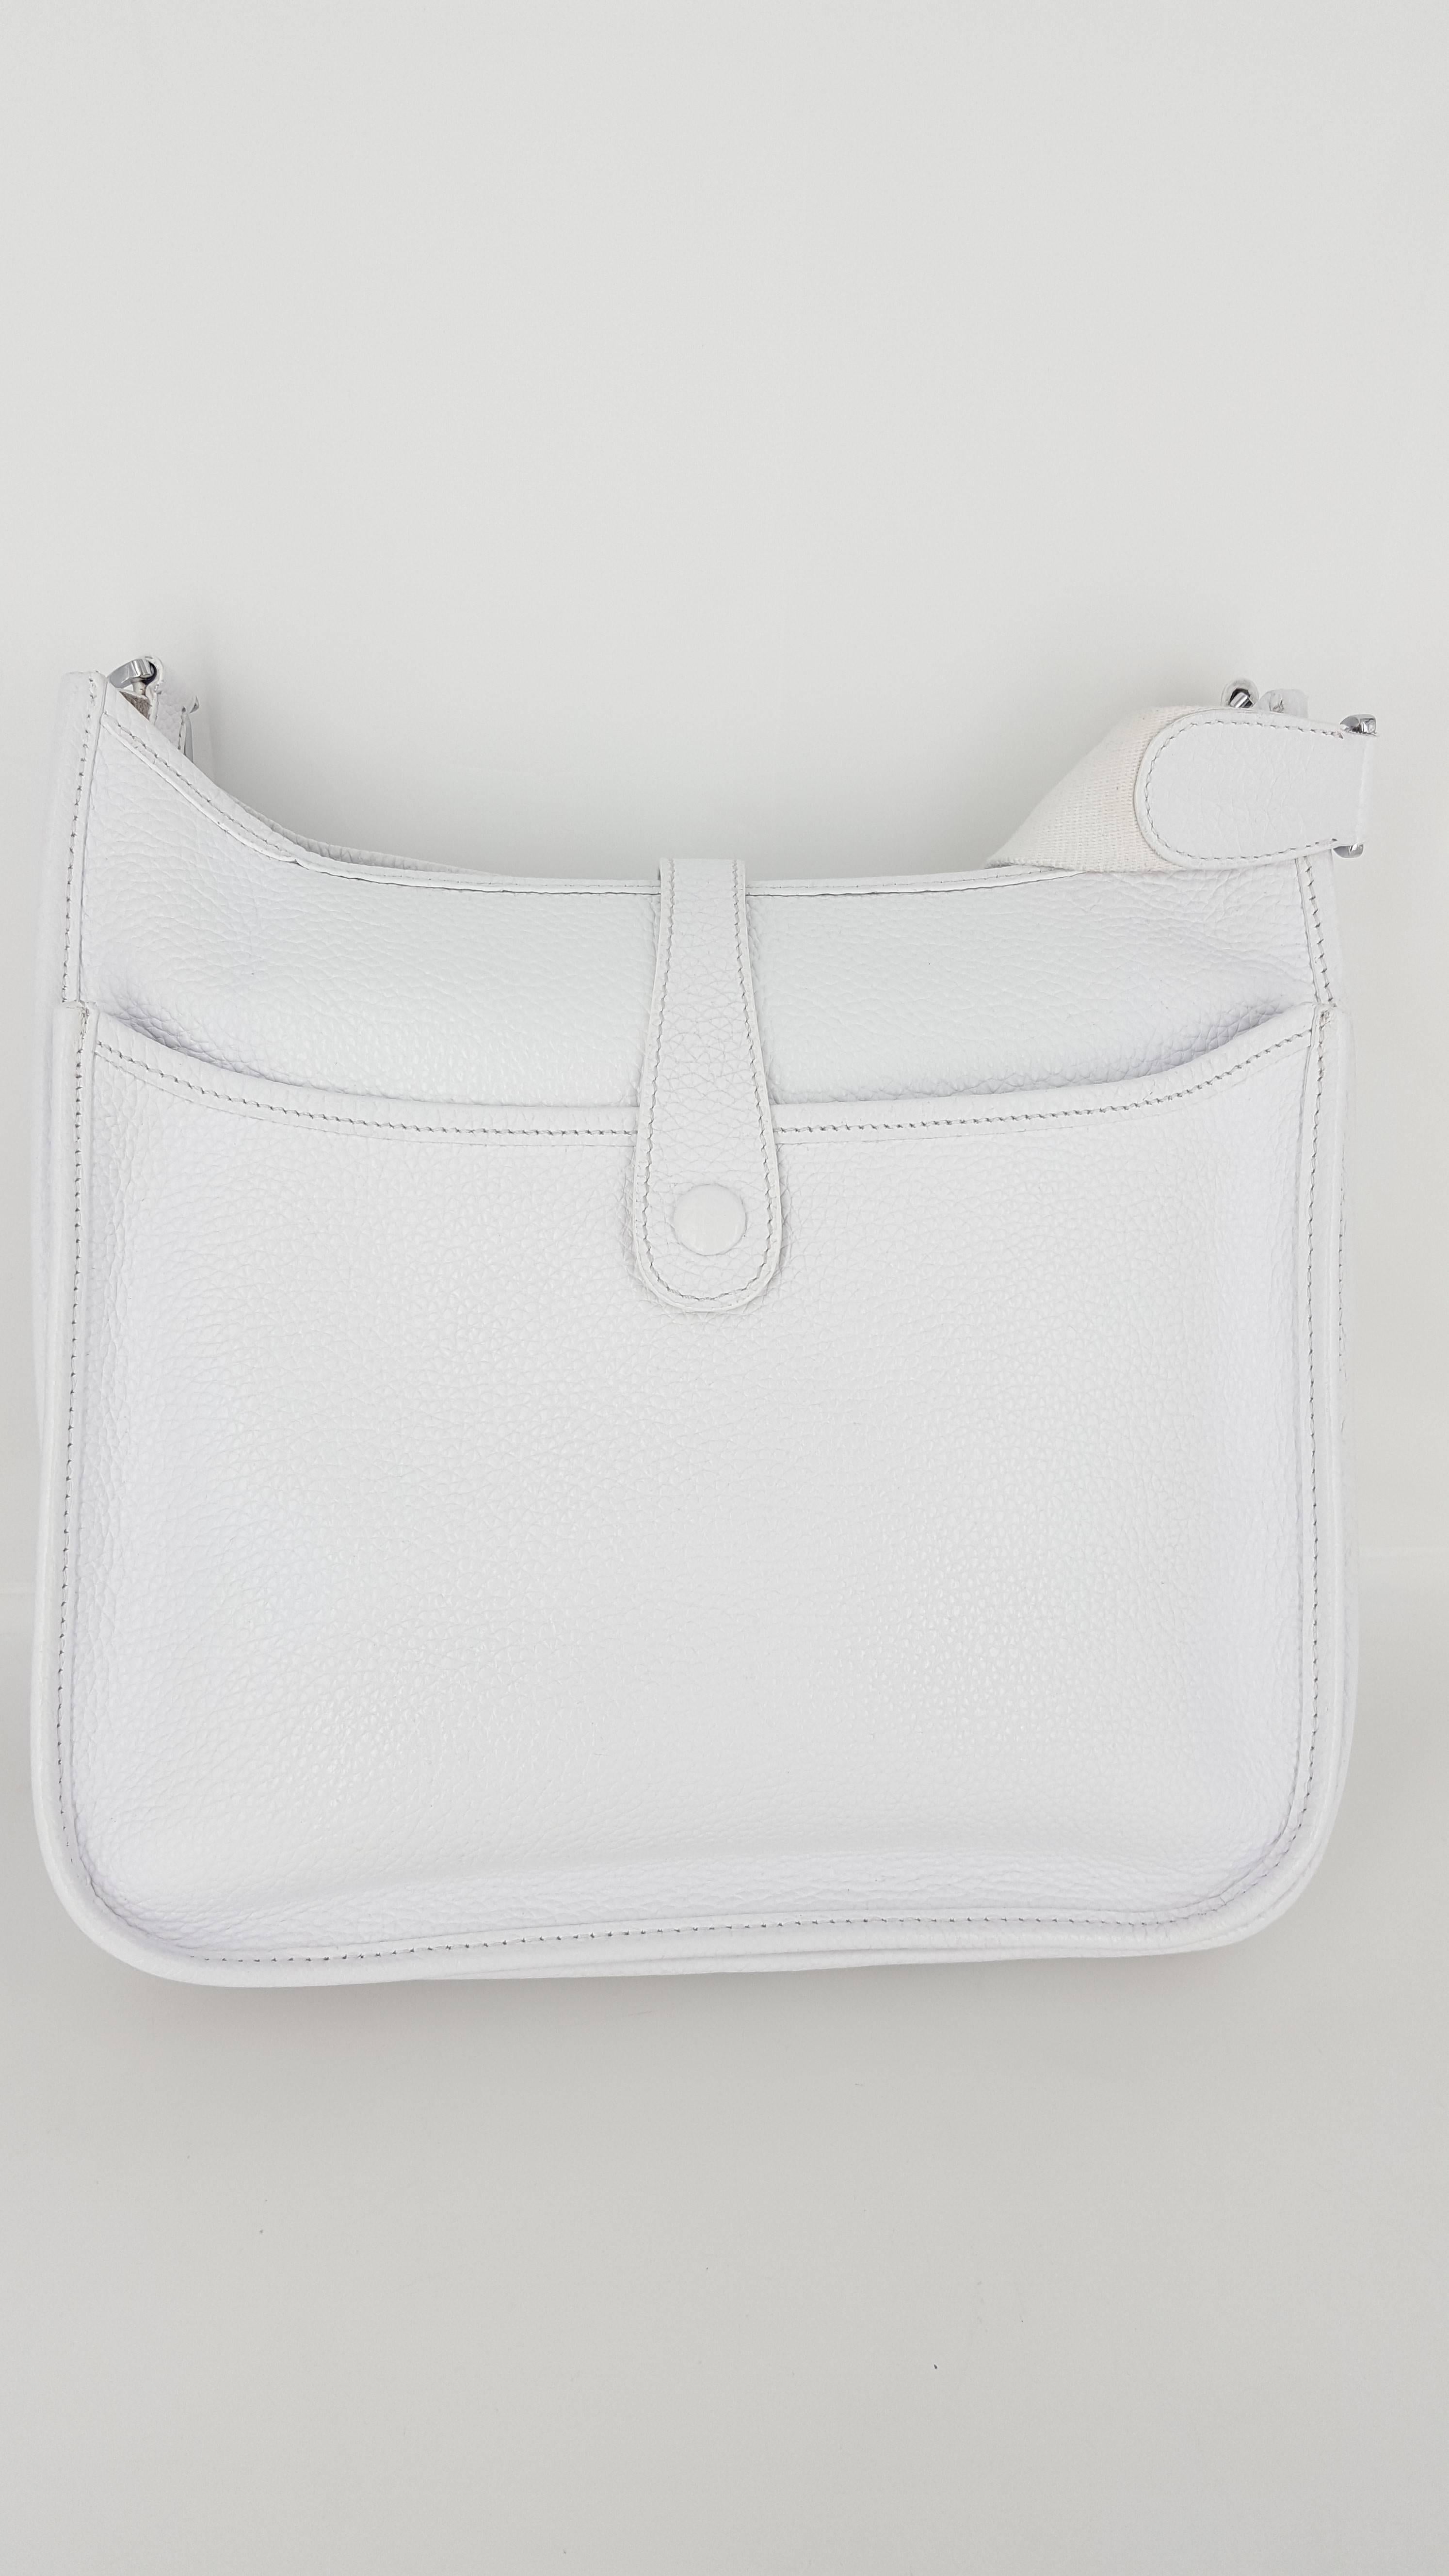 Offered for sale is a lovely Hermes Evelyne III PM in bright white with palladium hardware.  This is a nice size cross body bag with adjustable fabric strap.
The front of the bag has the well known perforated H and the rear of bag has a large 11